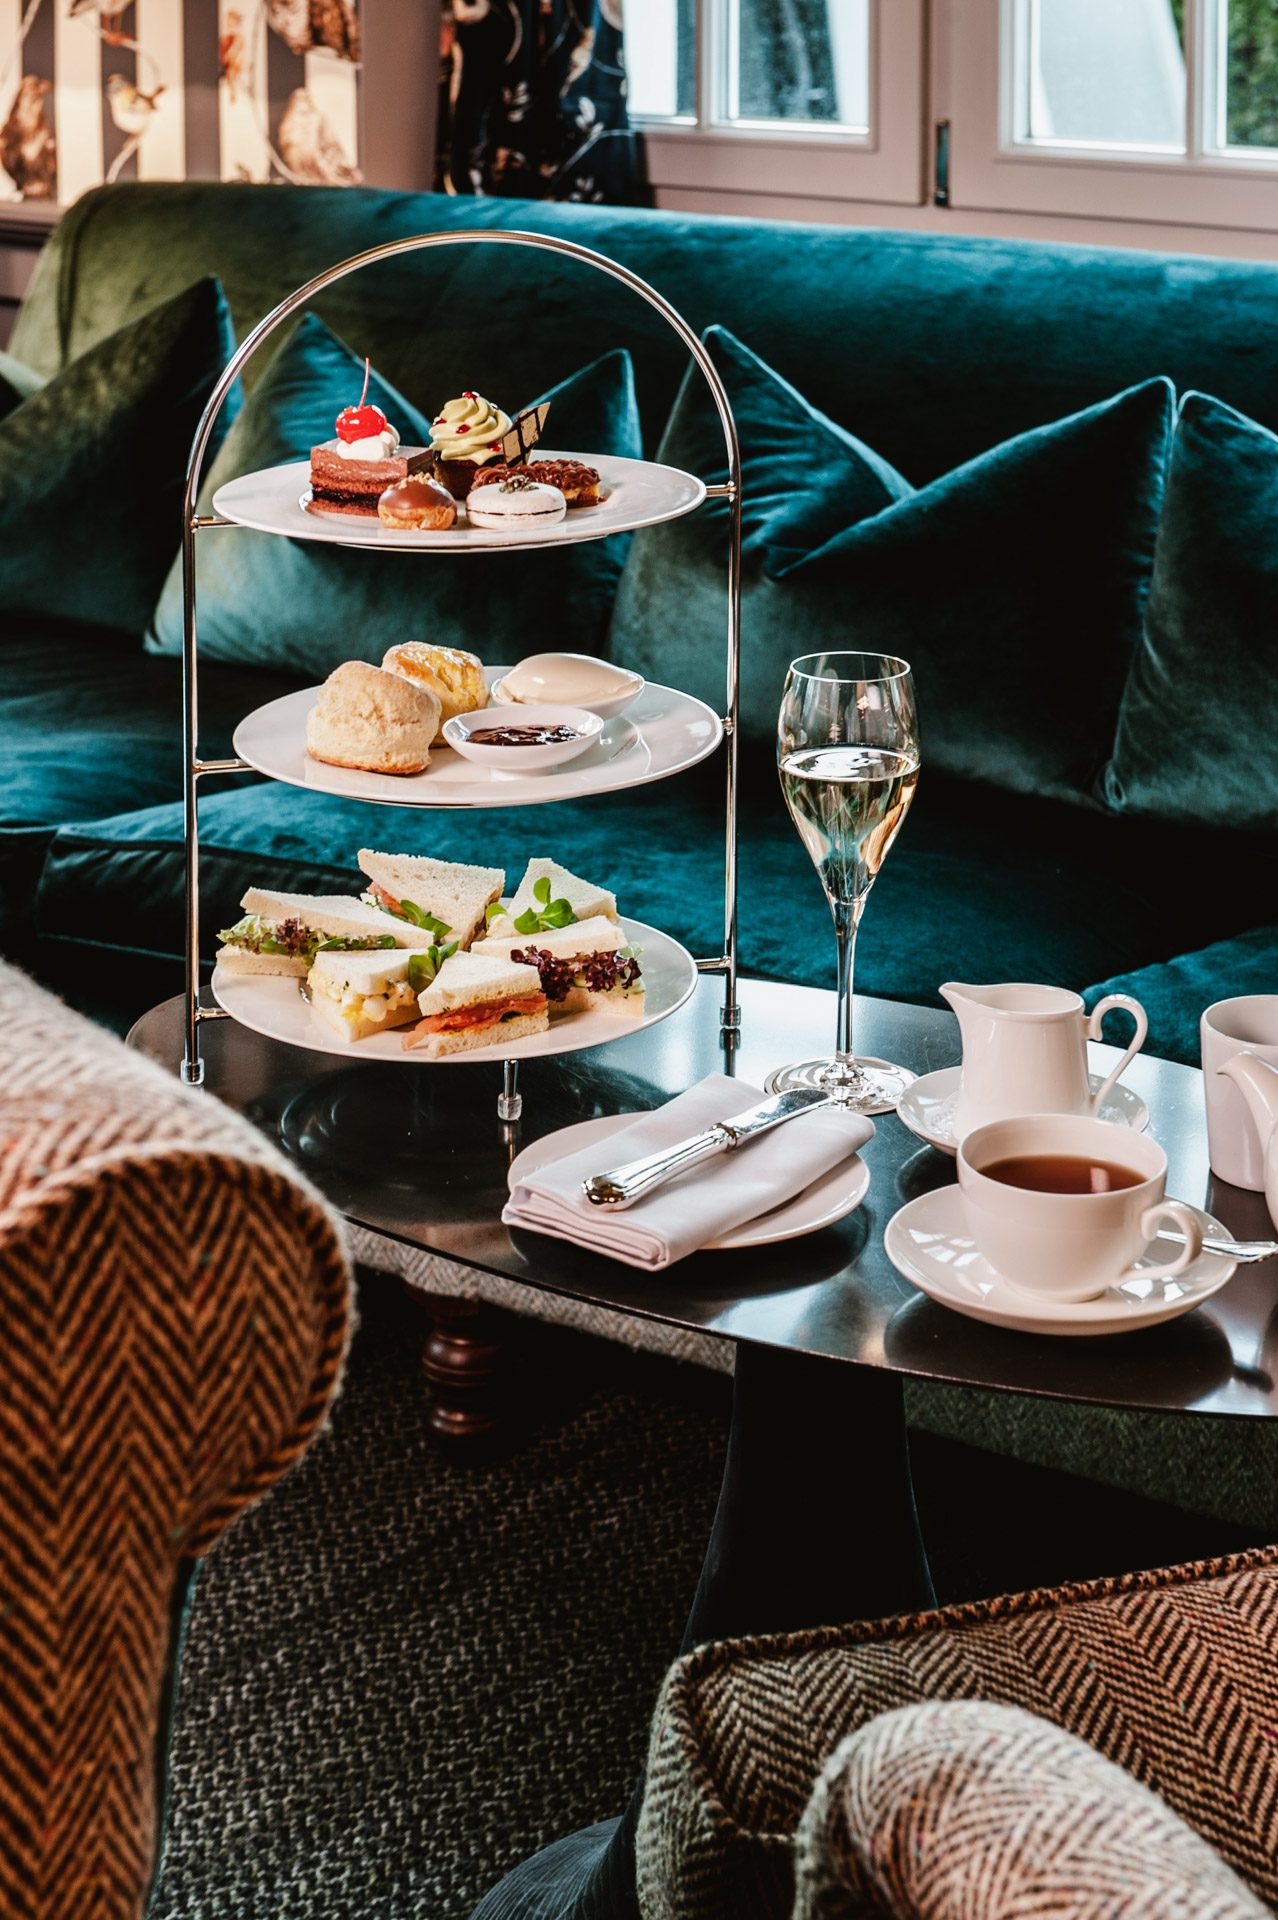 Swiss Deluxe Hotels Stories Summer 2021 Embedded Among Five Mountains 02 Afternoon Tea (1) Ecirgb